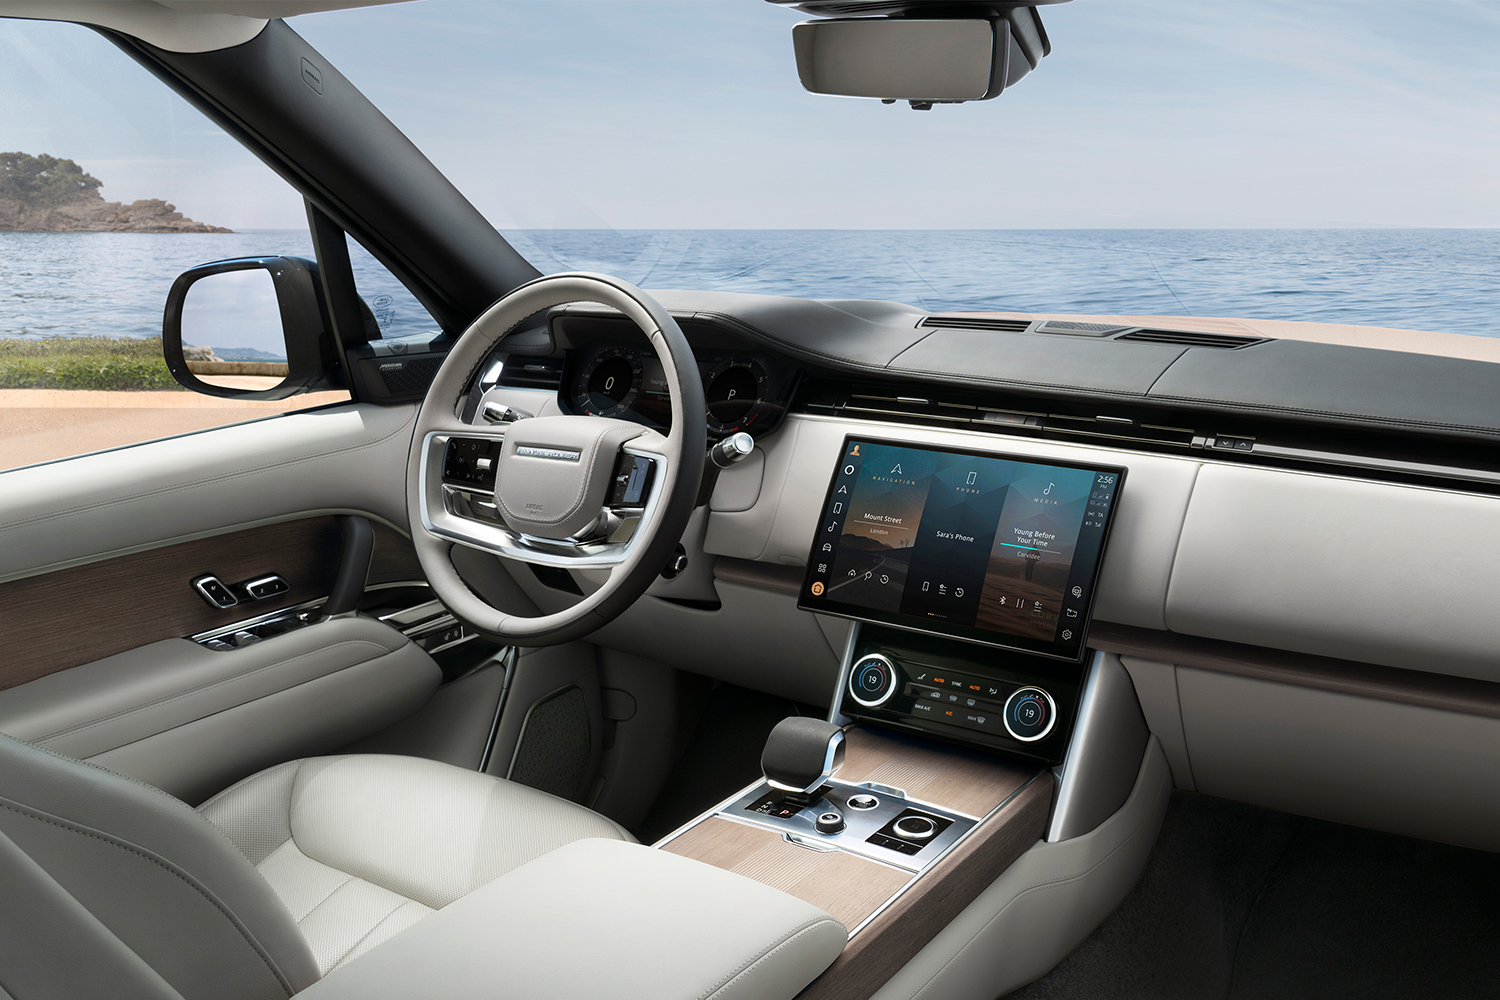 The interior of the new 2022 Range Rover, the fifth generation of the luxury SUV, showing the new tablet infotainment